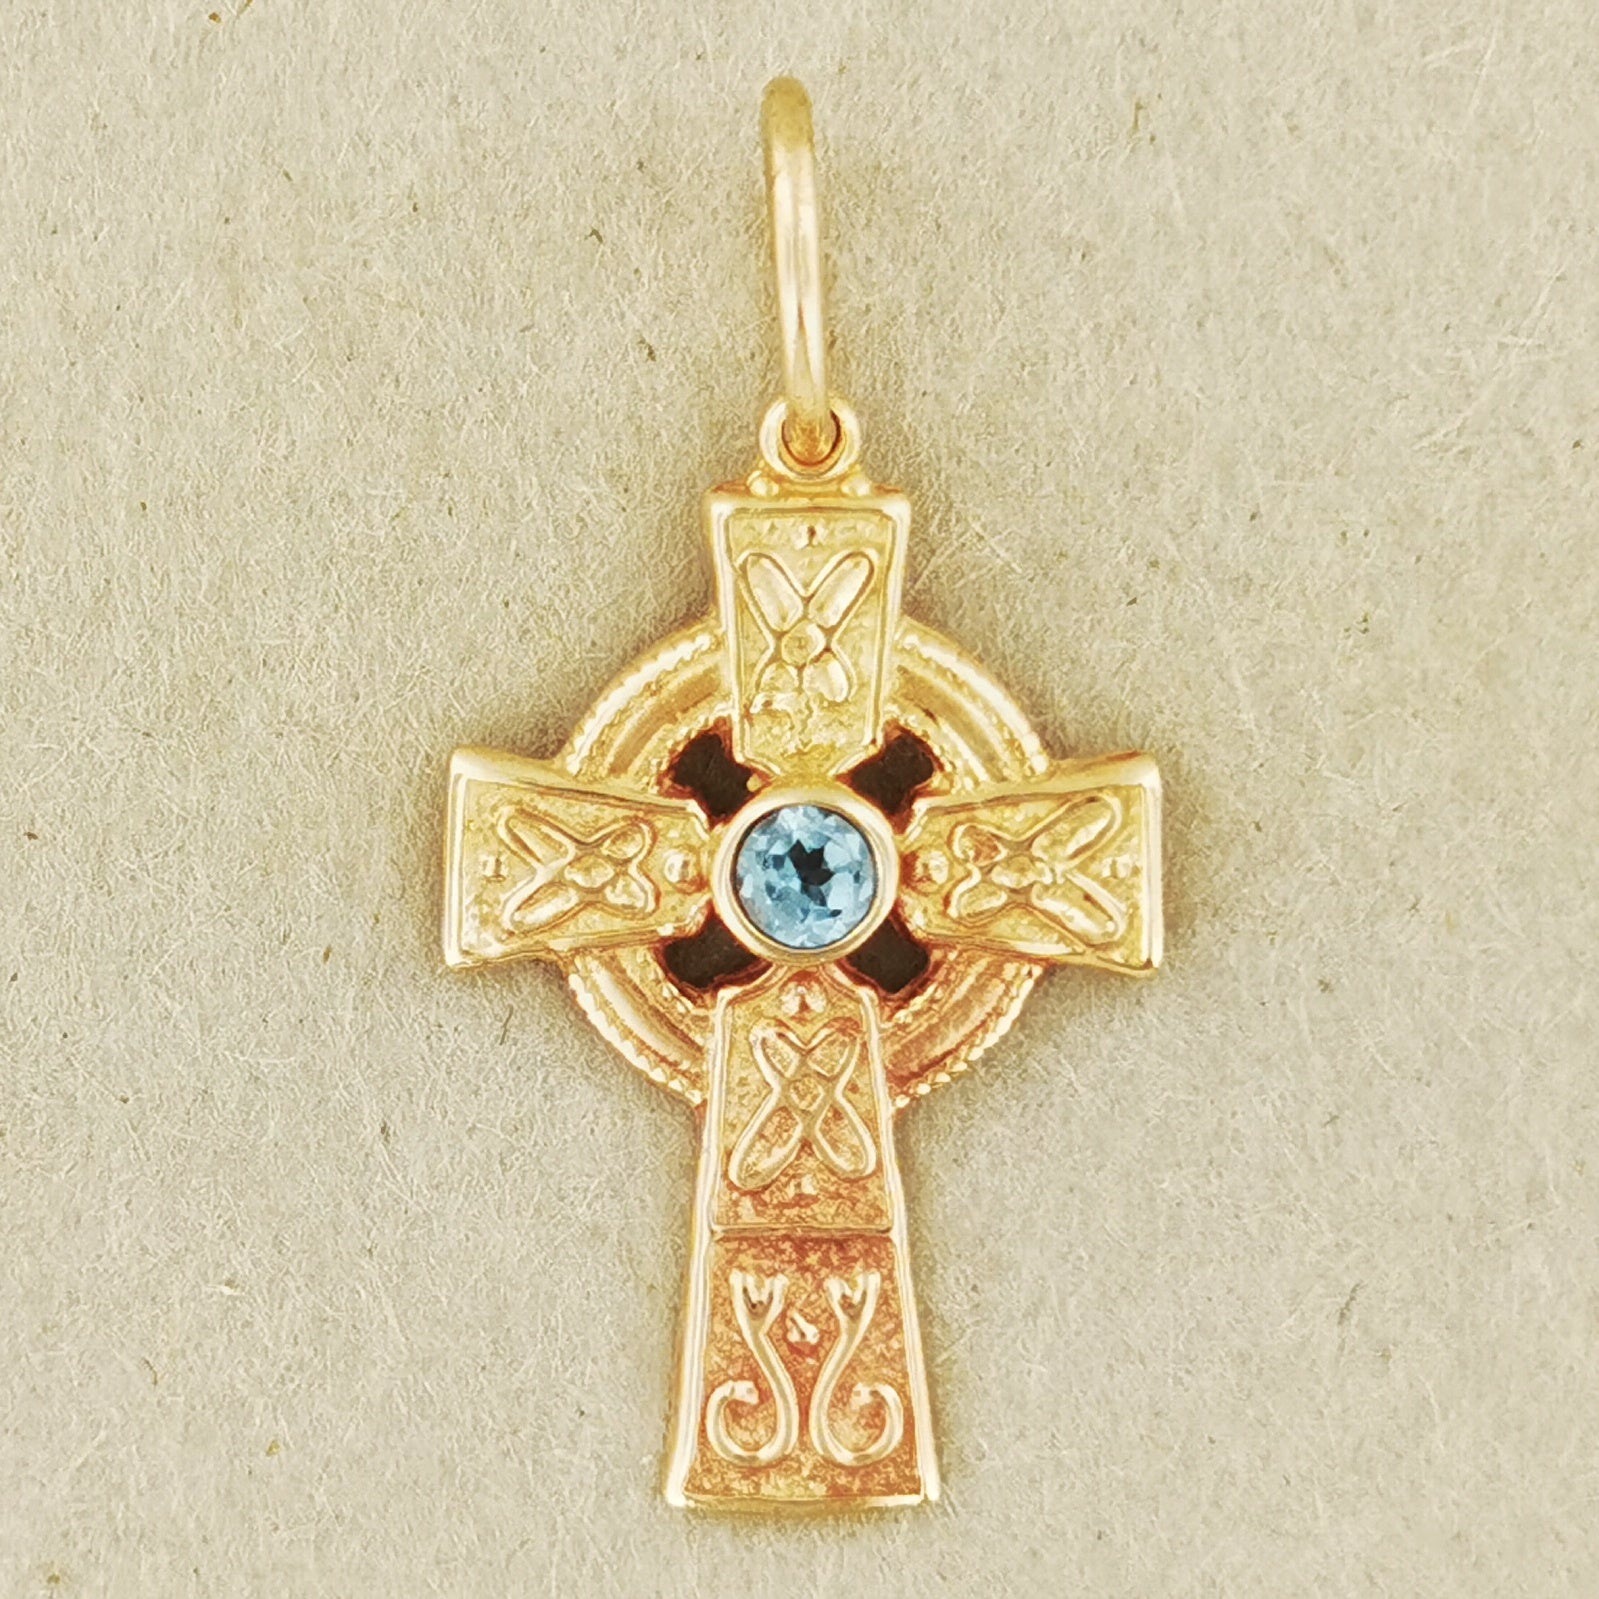 Small Celtic Cross with Gemstone in Sterling Silver or Antique Bronze, Birthstone Celtic Cross Pendant, Antique Bronze Celtic Cross Pendant, Irish Cross Birthstone Pendant, Bronze Celtic Cross Pendant, Antique Bronze Irish Jewelry